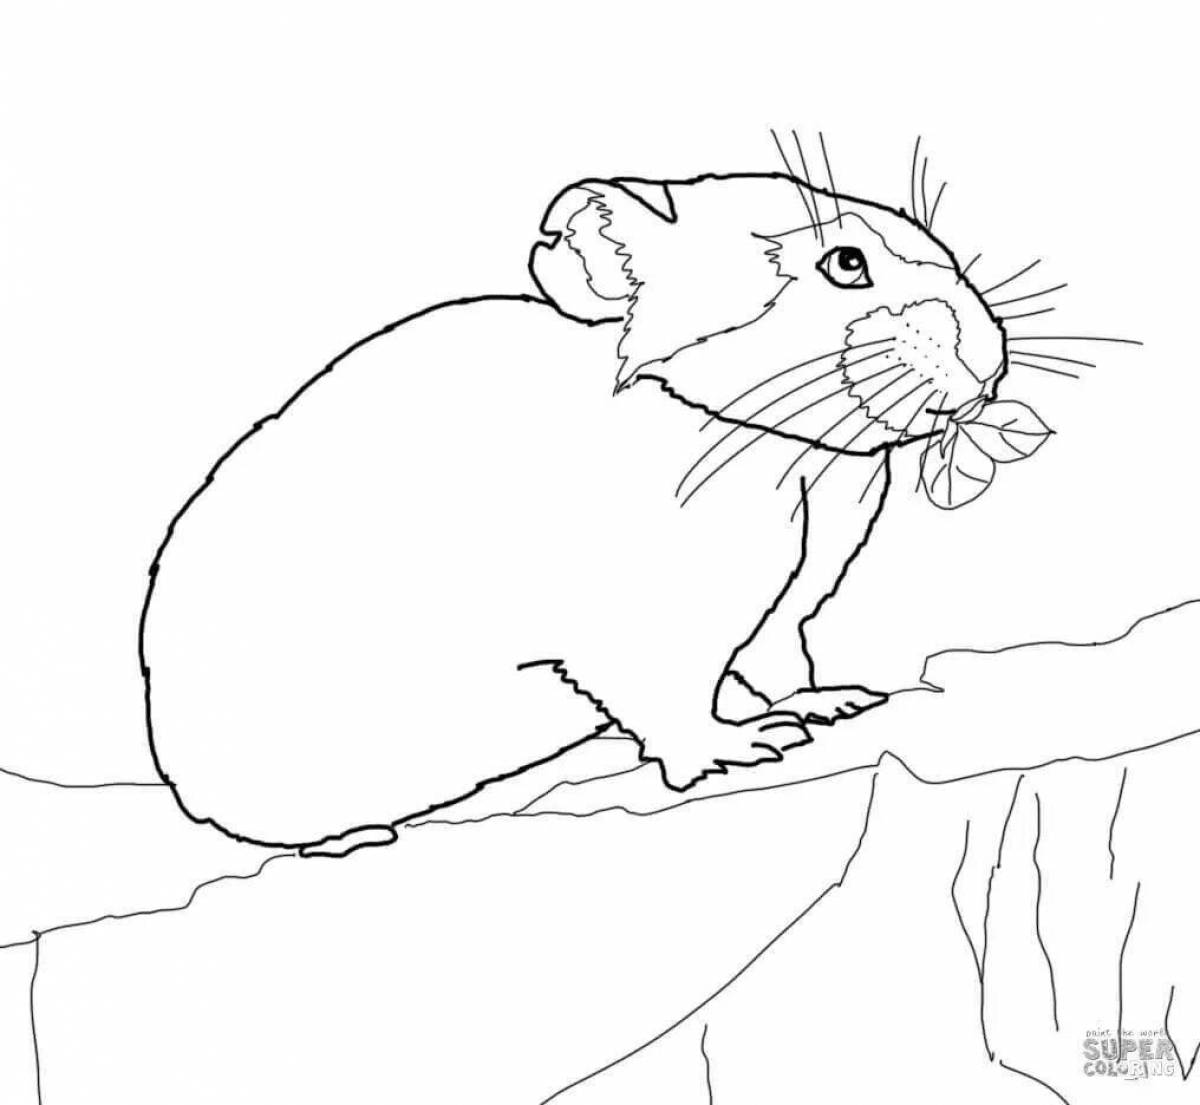 Delightful lemming coloring book